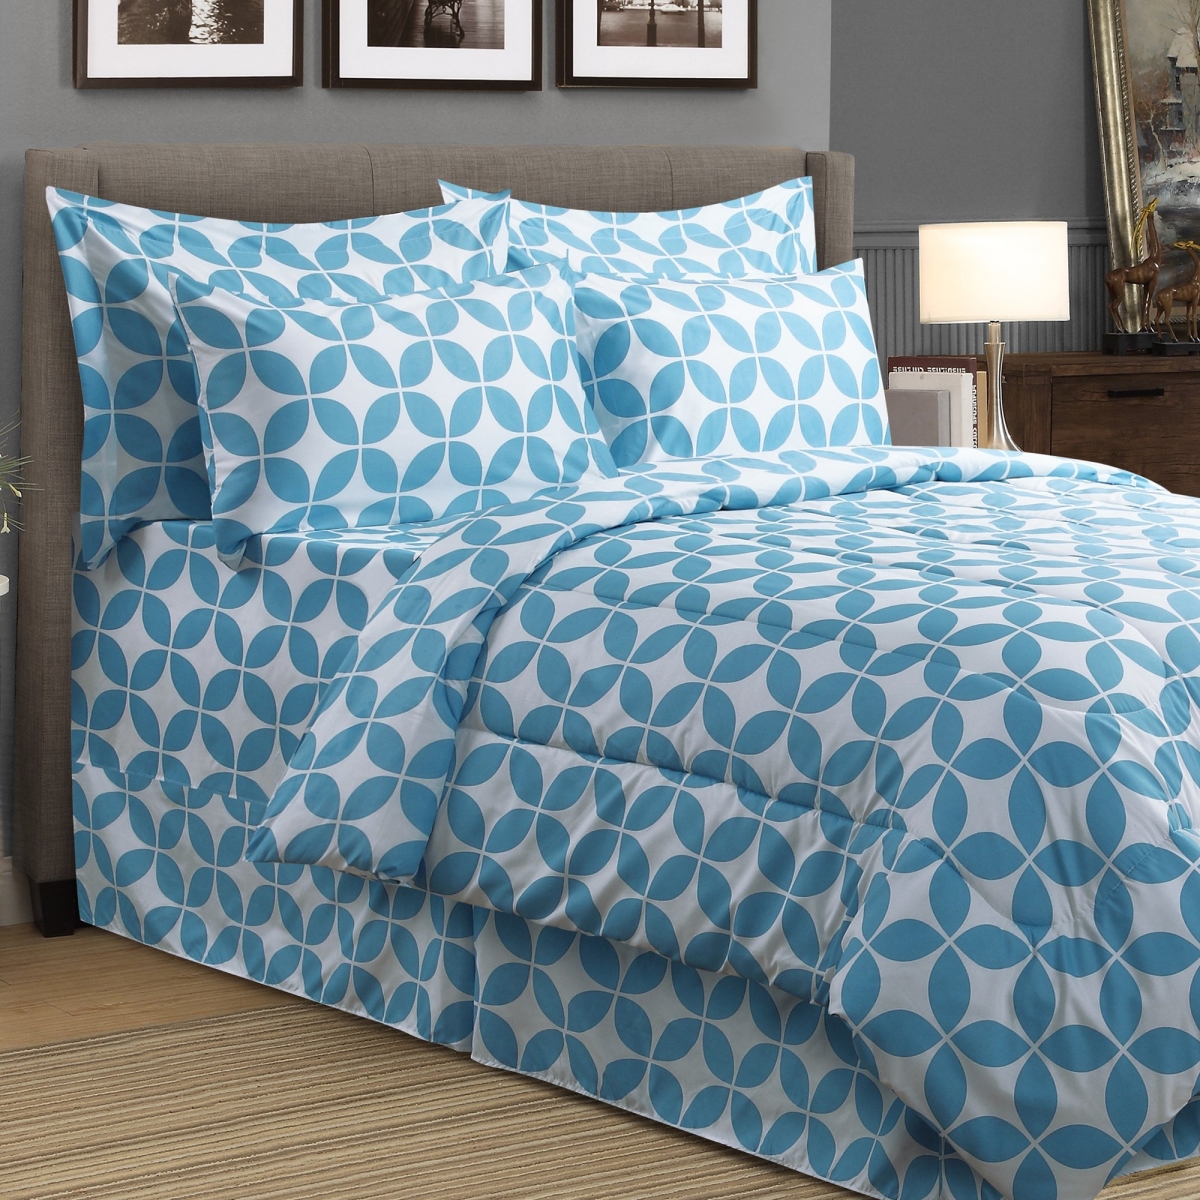 Sq-fe-addis-q08 8 Piece Addison Bed In A Bag Comforter Set - Queen Size